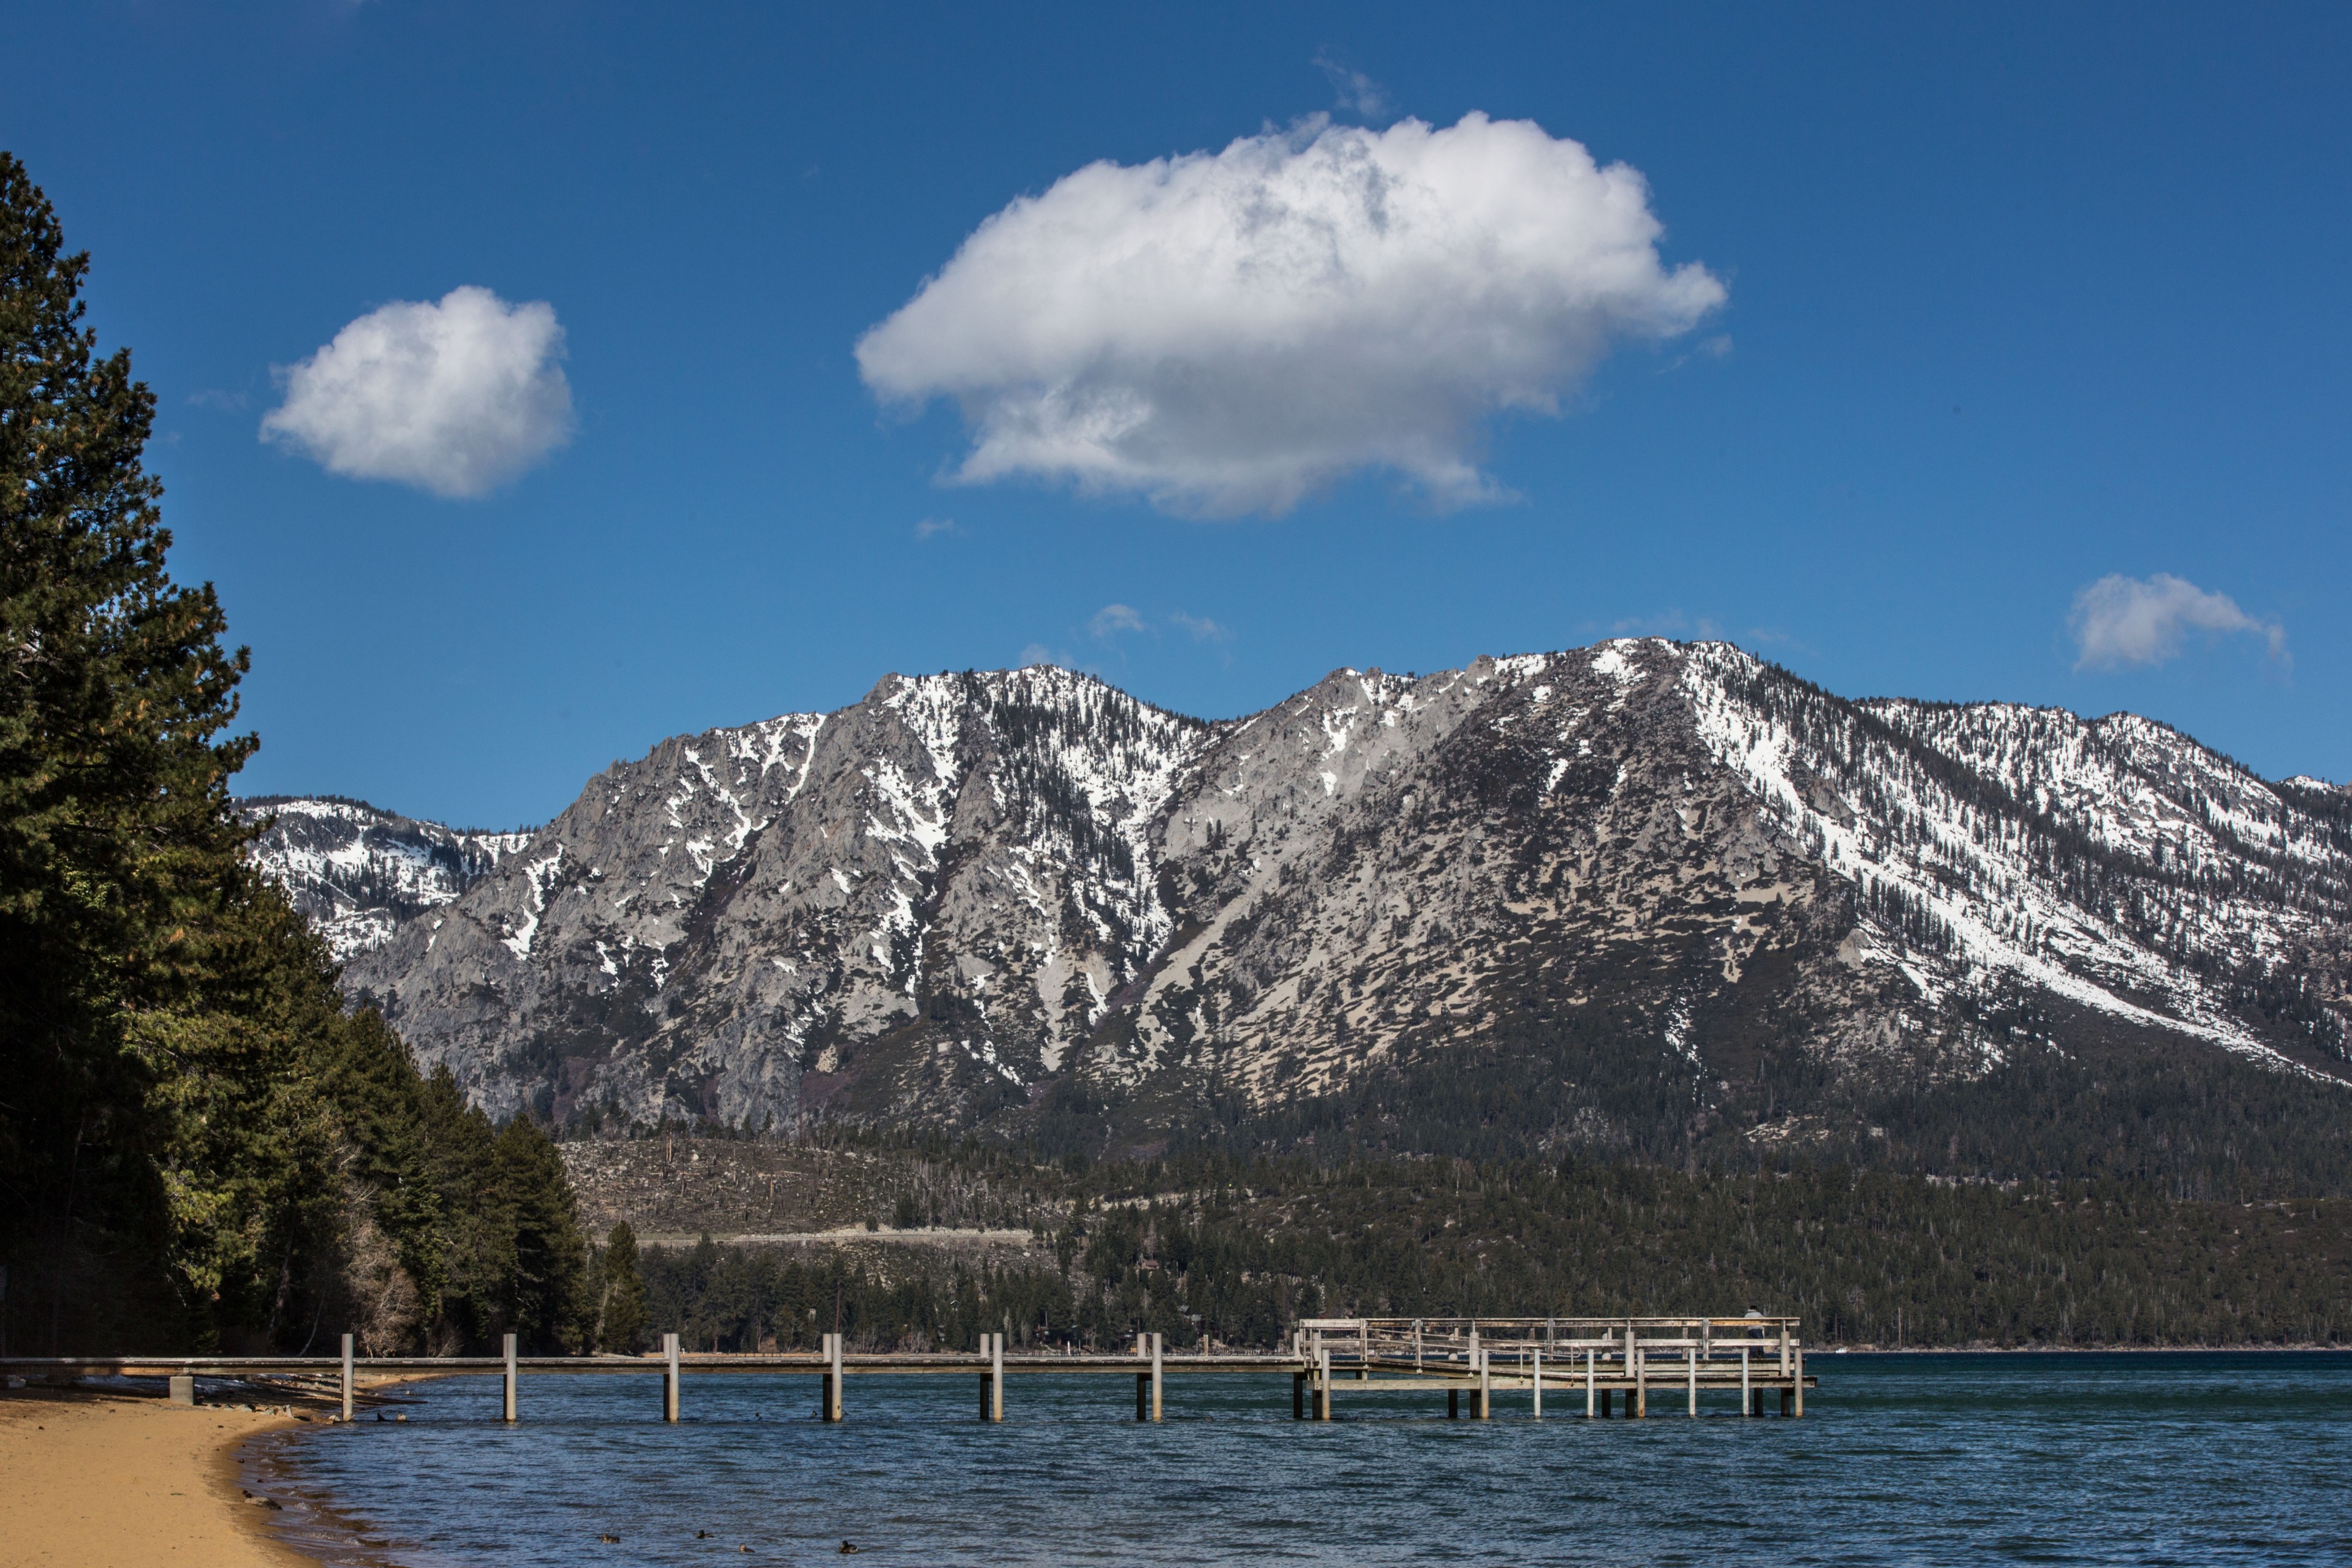 This image shows a serene lake with a sandy shore, a wooden pier, and snow-capped mountains in the background under a clear blue sky with a few fluffy clouds.